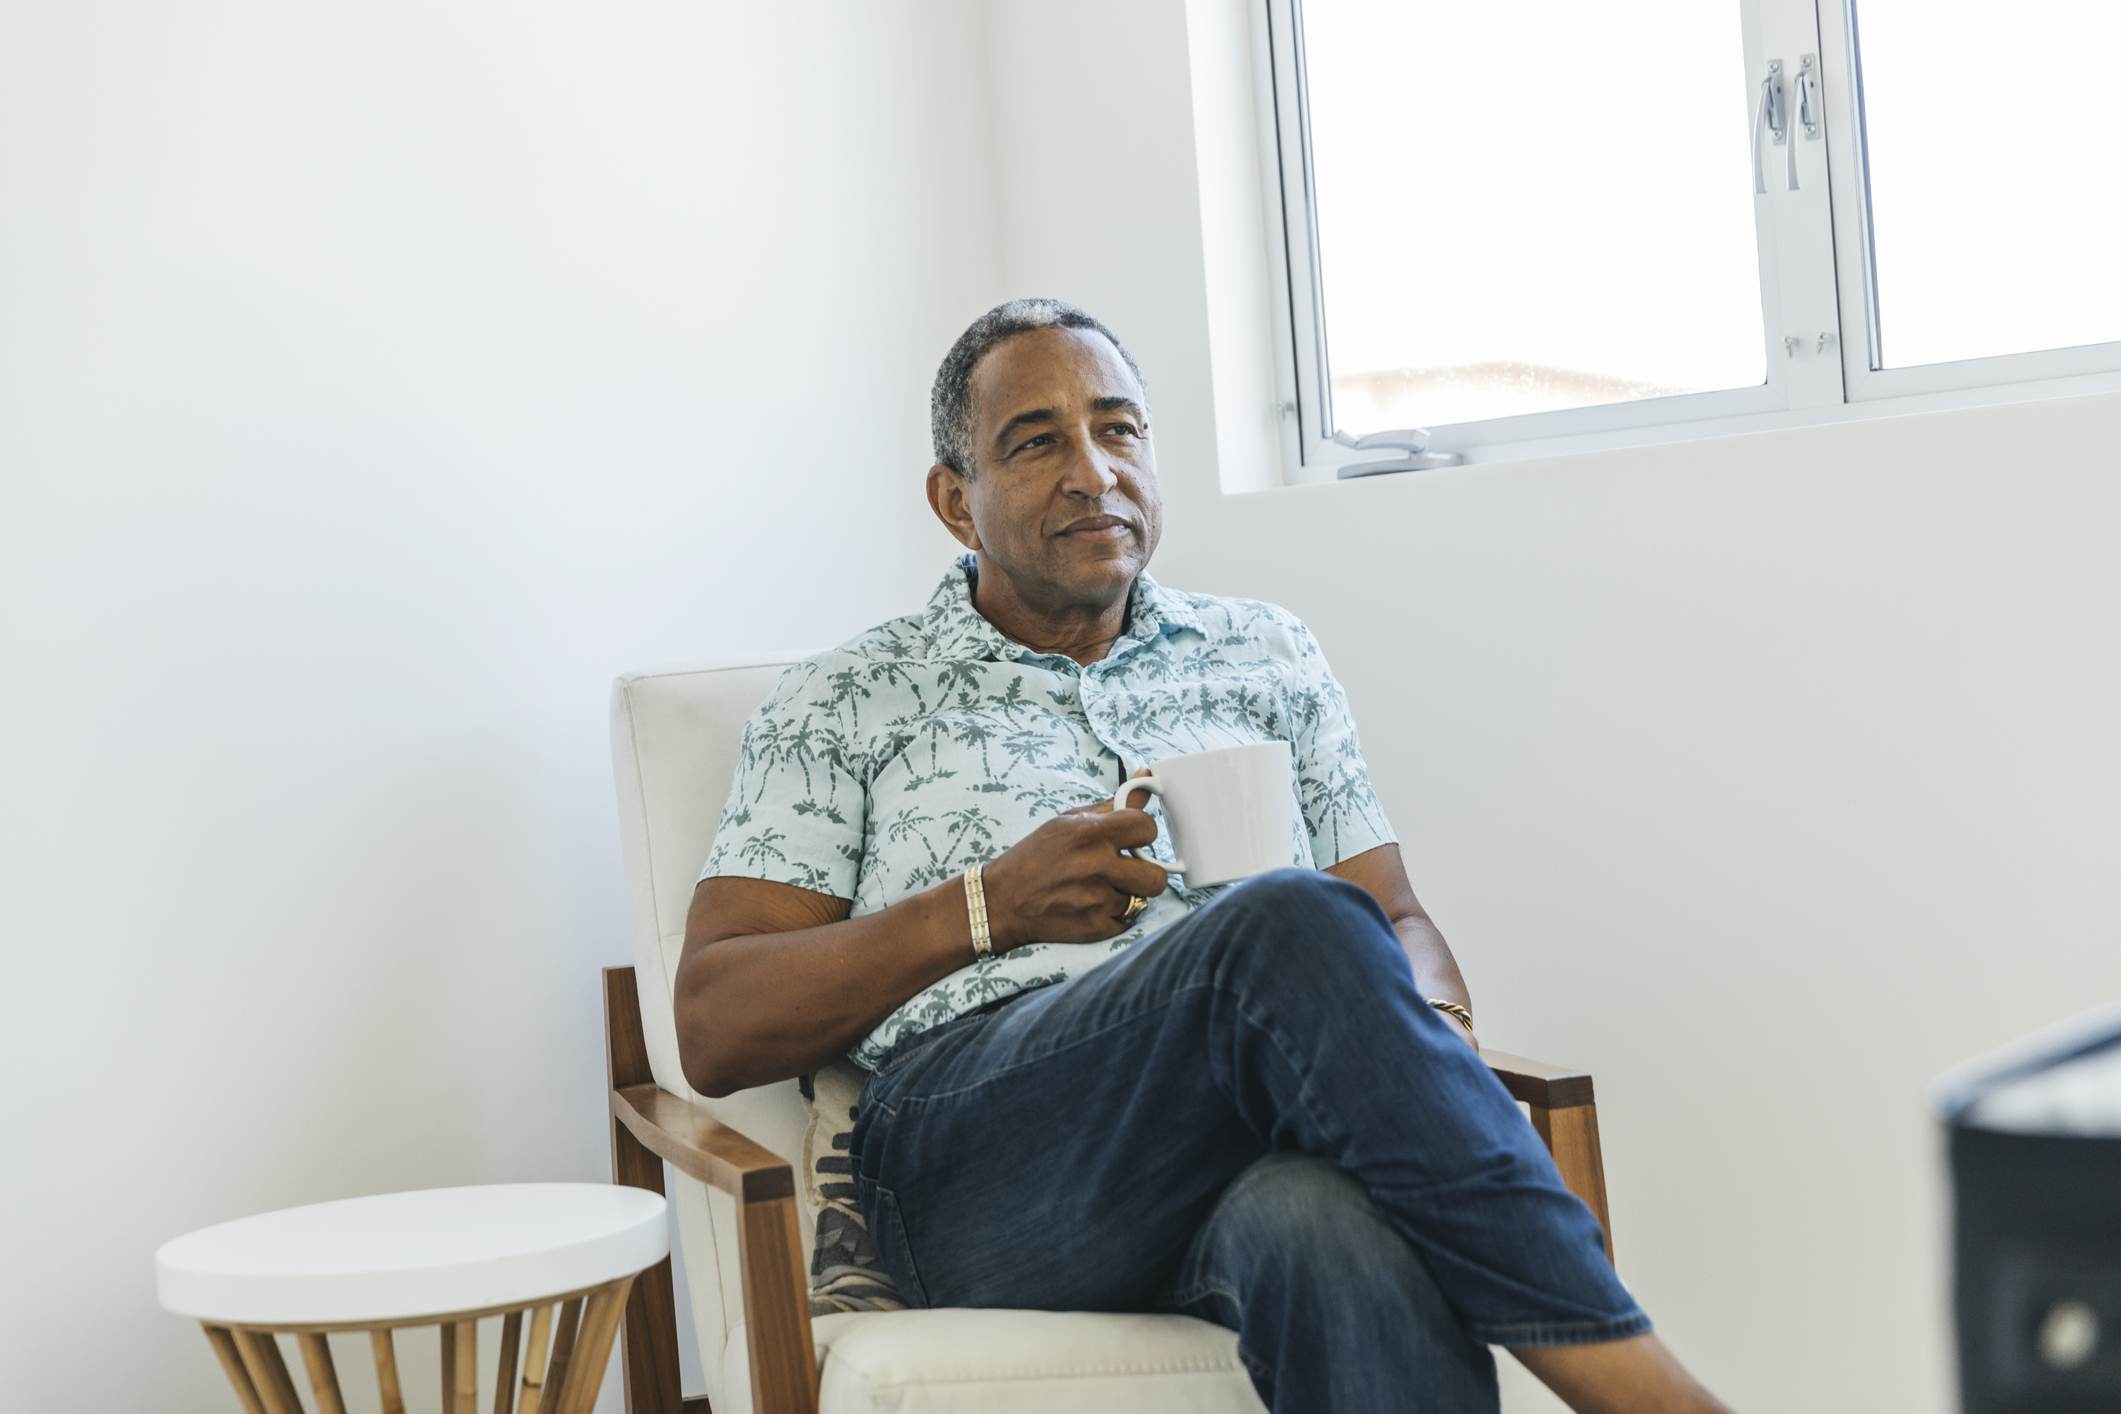 Man sitting in chair by window holding a mug, relaxed posture, in casual attire